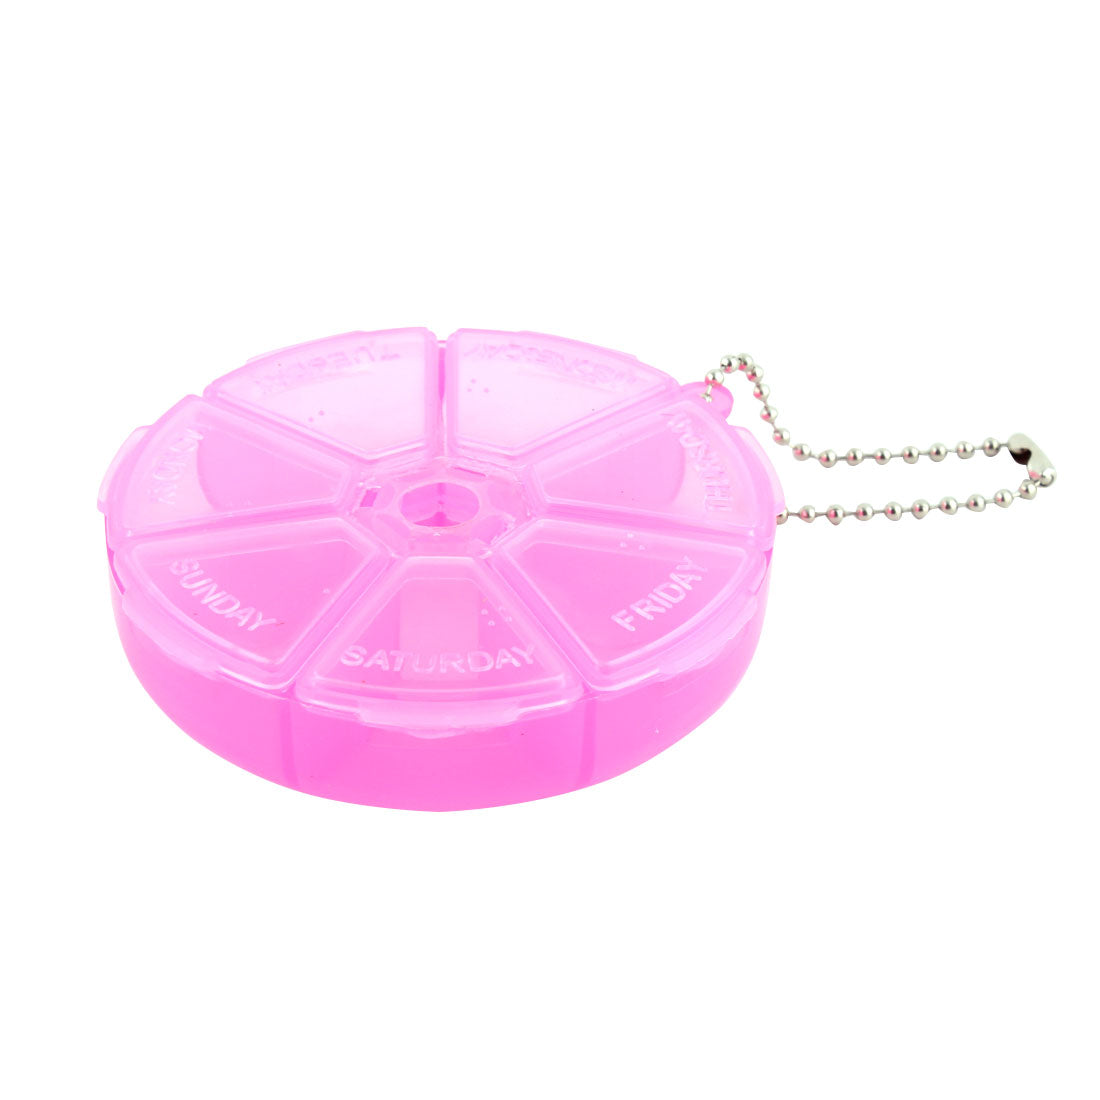 uxcell Uxcell Round Shaped Pill 7 Slots Organizer Box Case Container Fuchsia